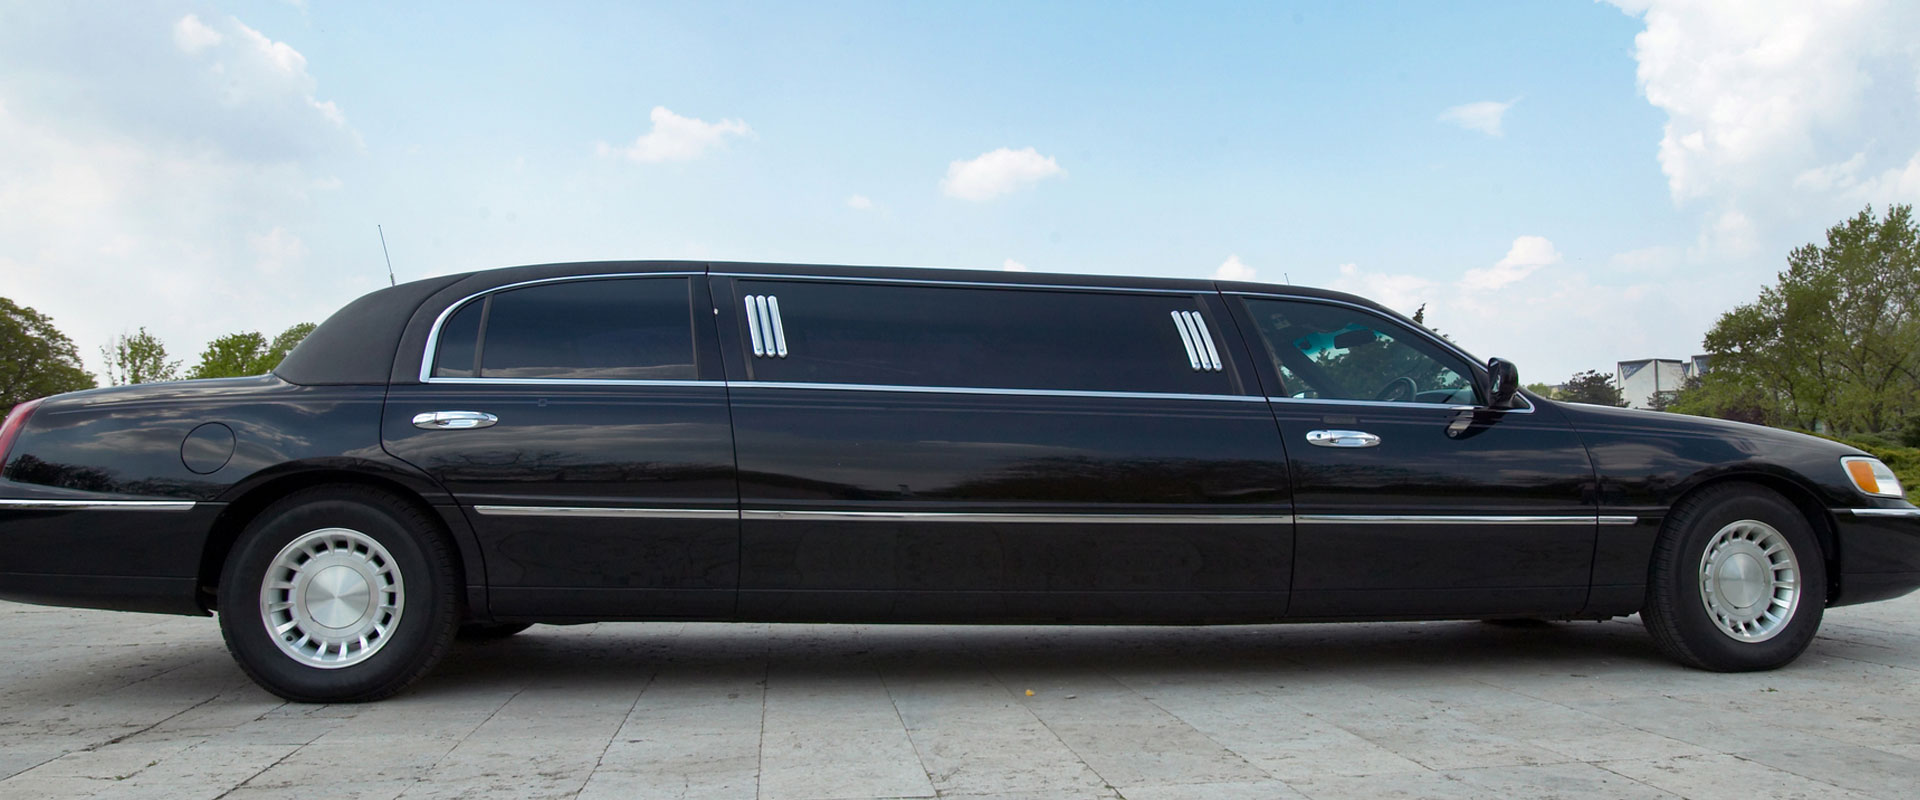 18-seater luxury limo bus